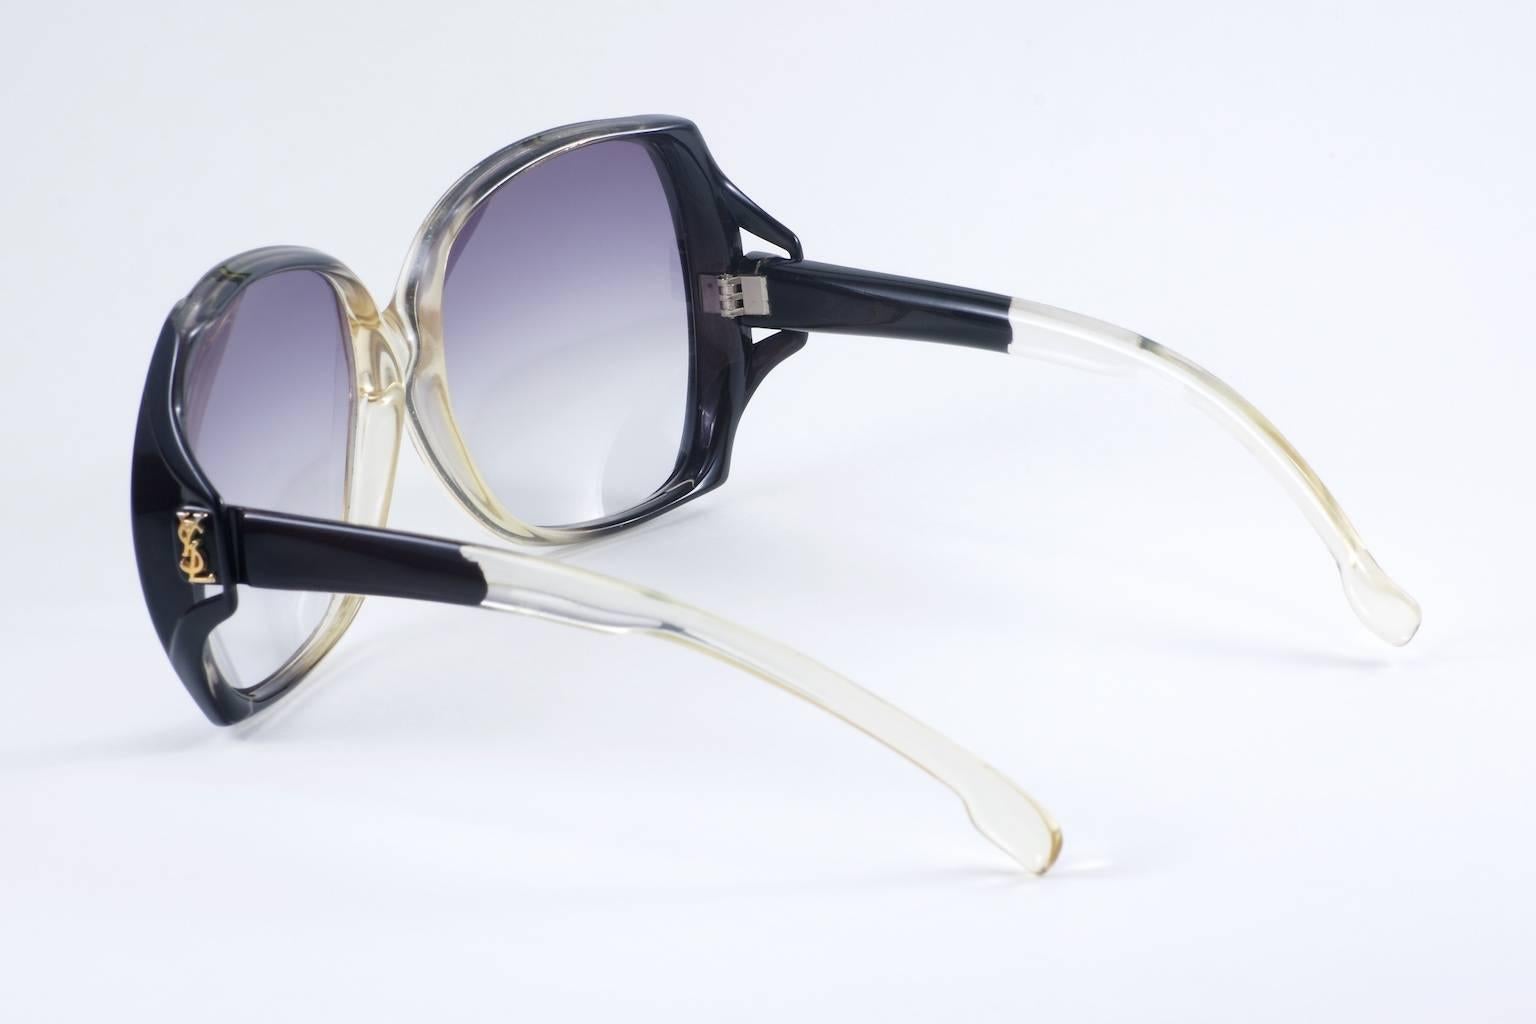 Vintage Haute Couture Runway Yves Saint Laurent Sunglasses, Made in France In New Condition For Sale In Los Angeles, CA